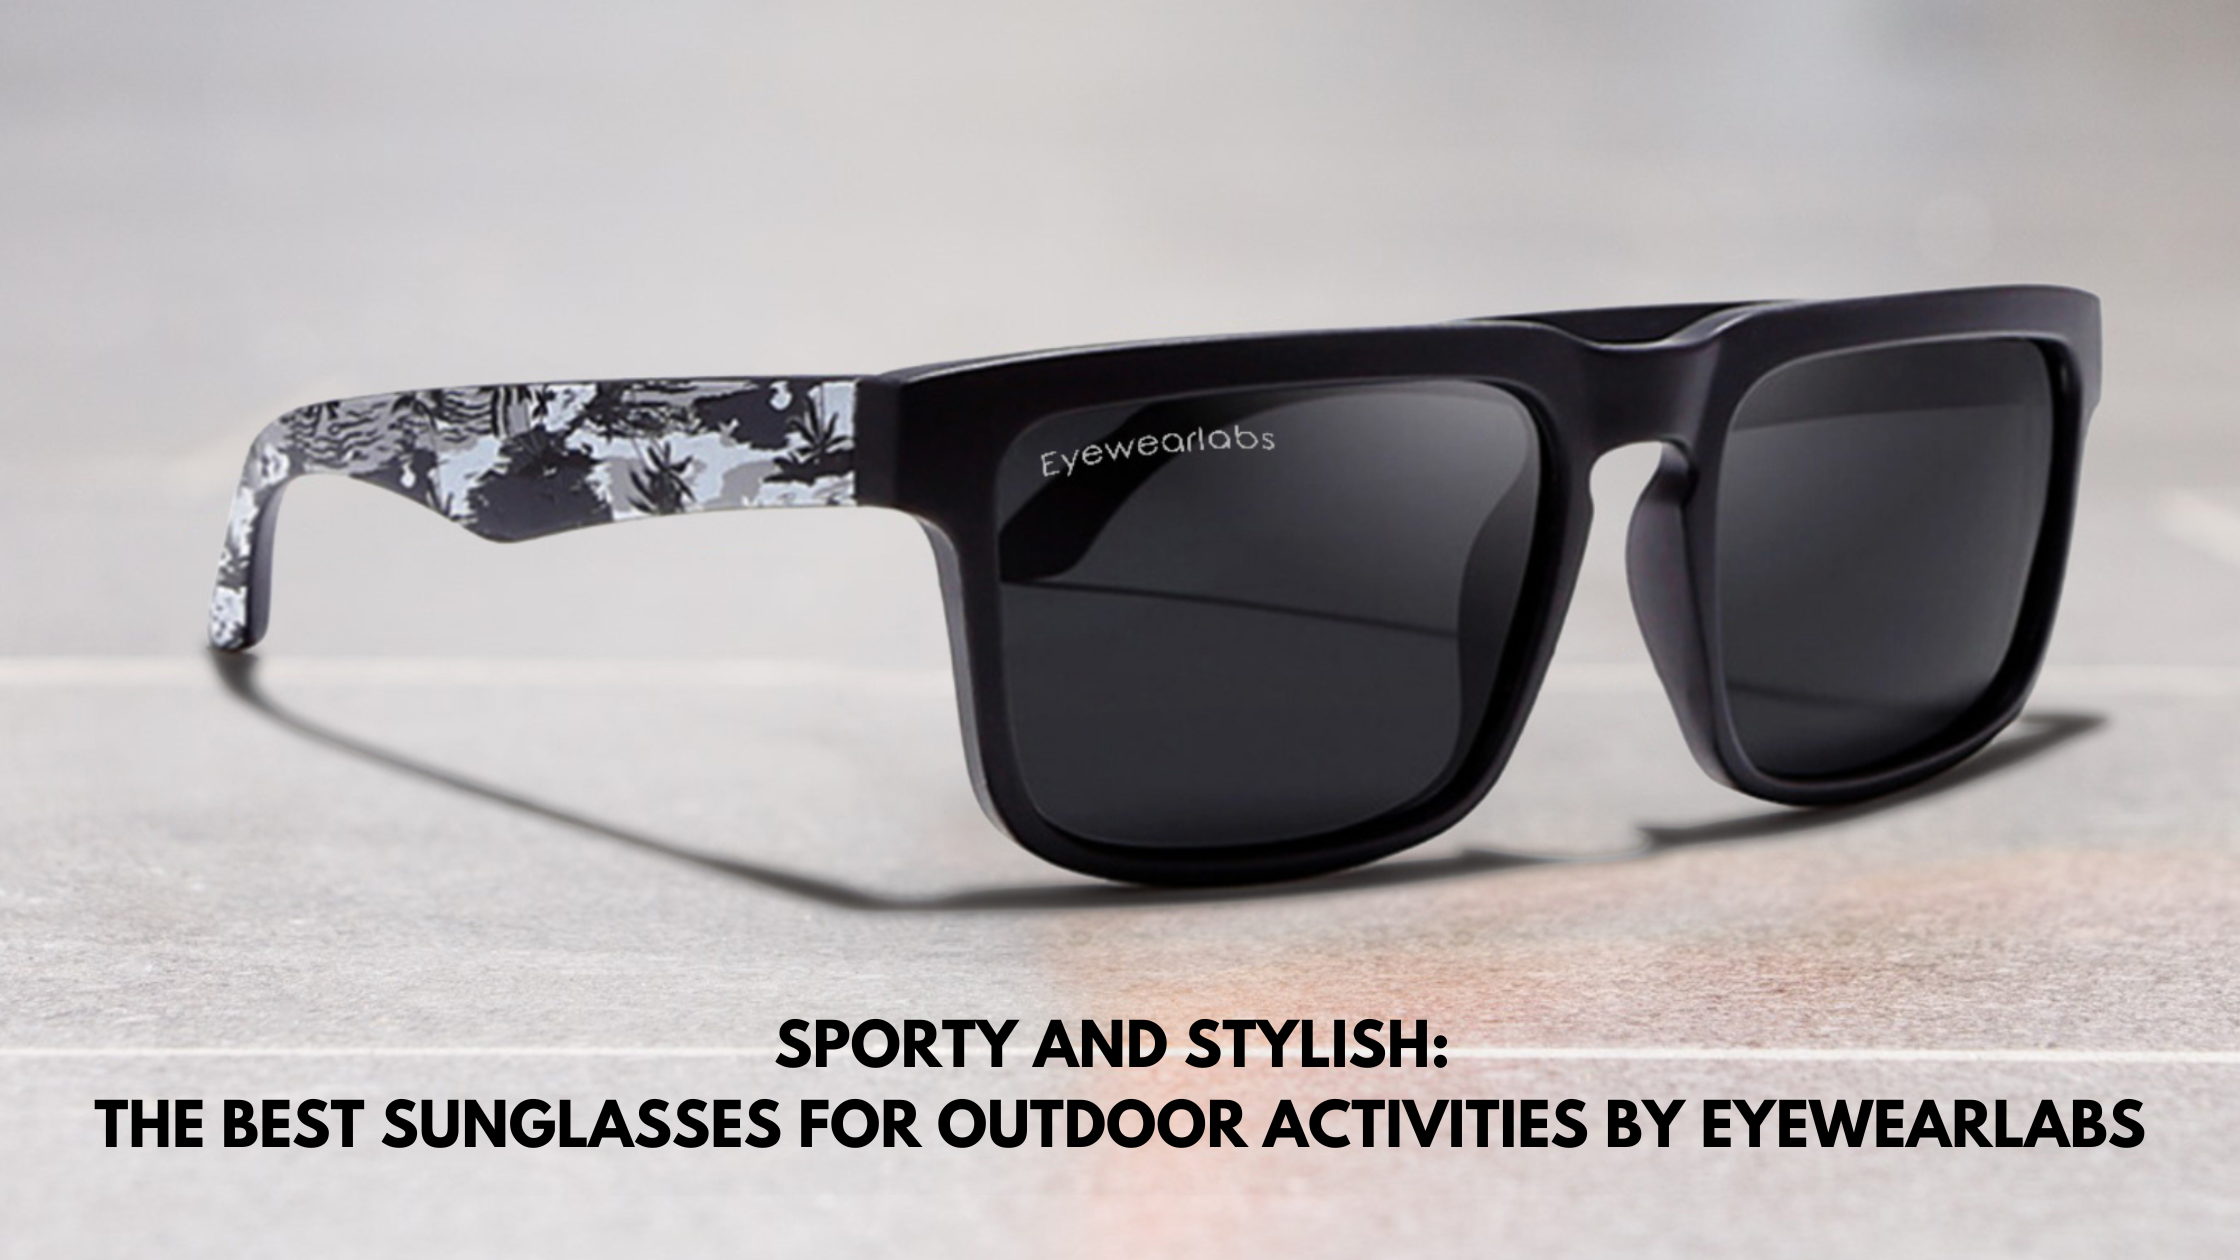 Sporty and Stylish: The Best Sunglasses for Outdoor Activities by Eyewearlabs